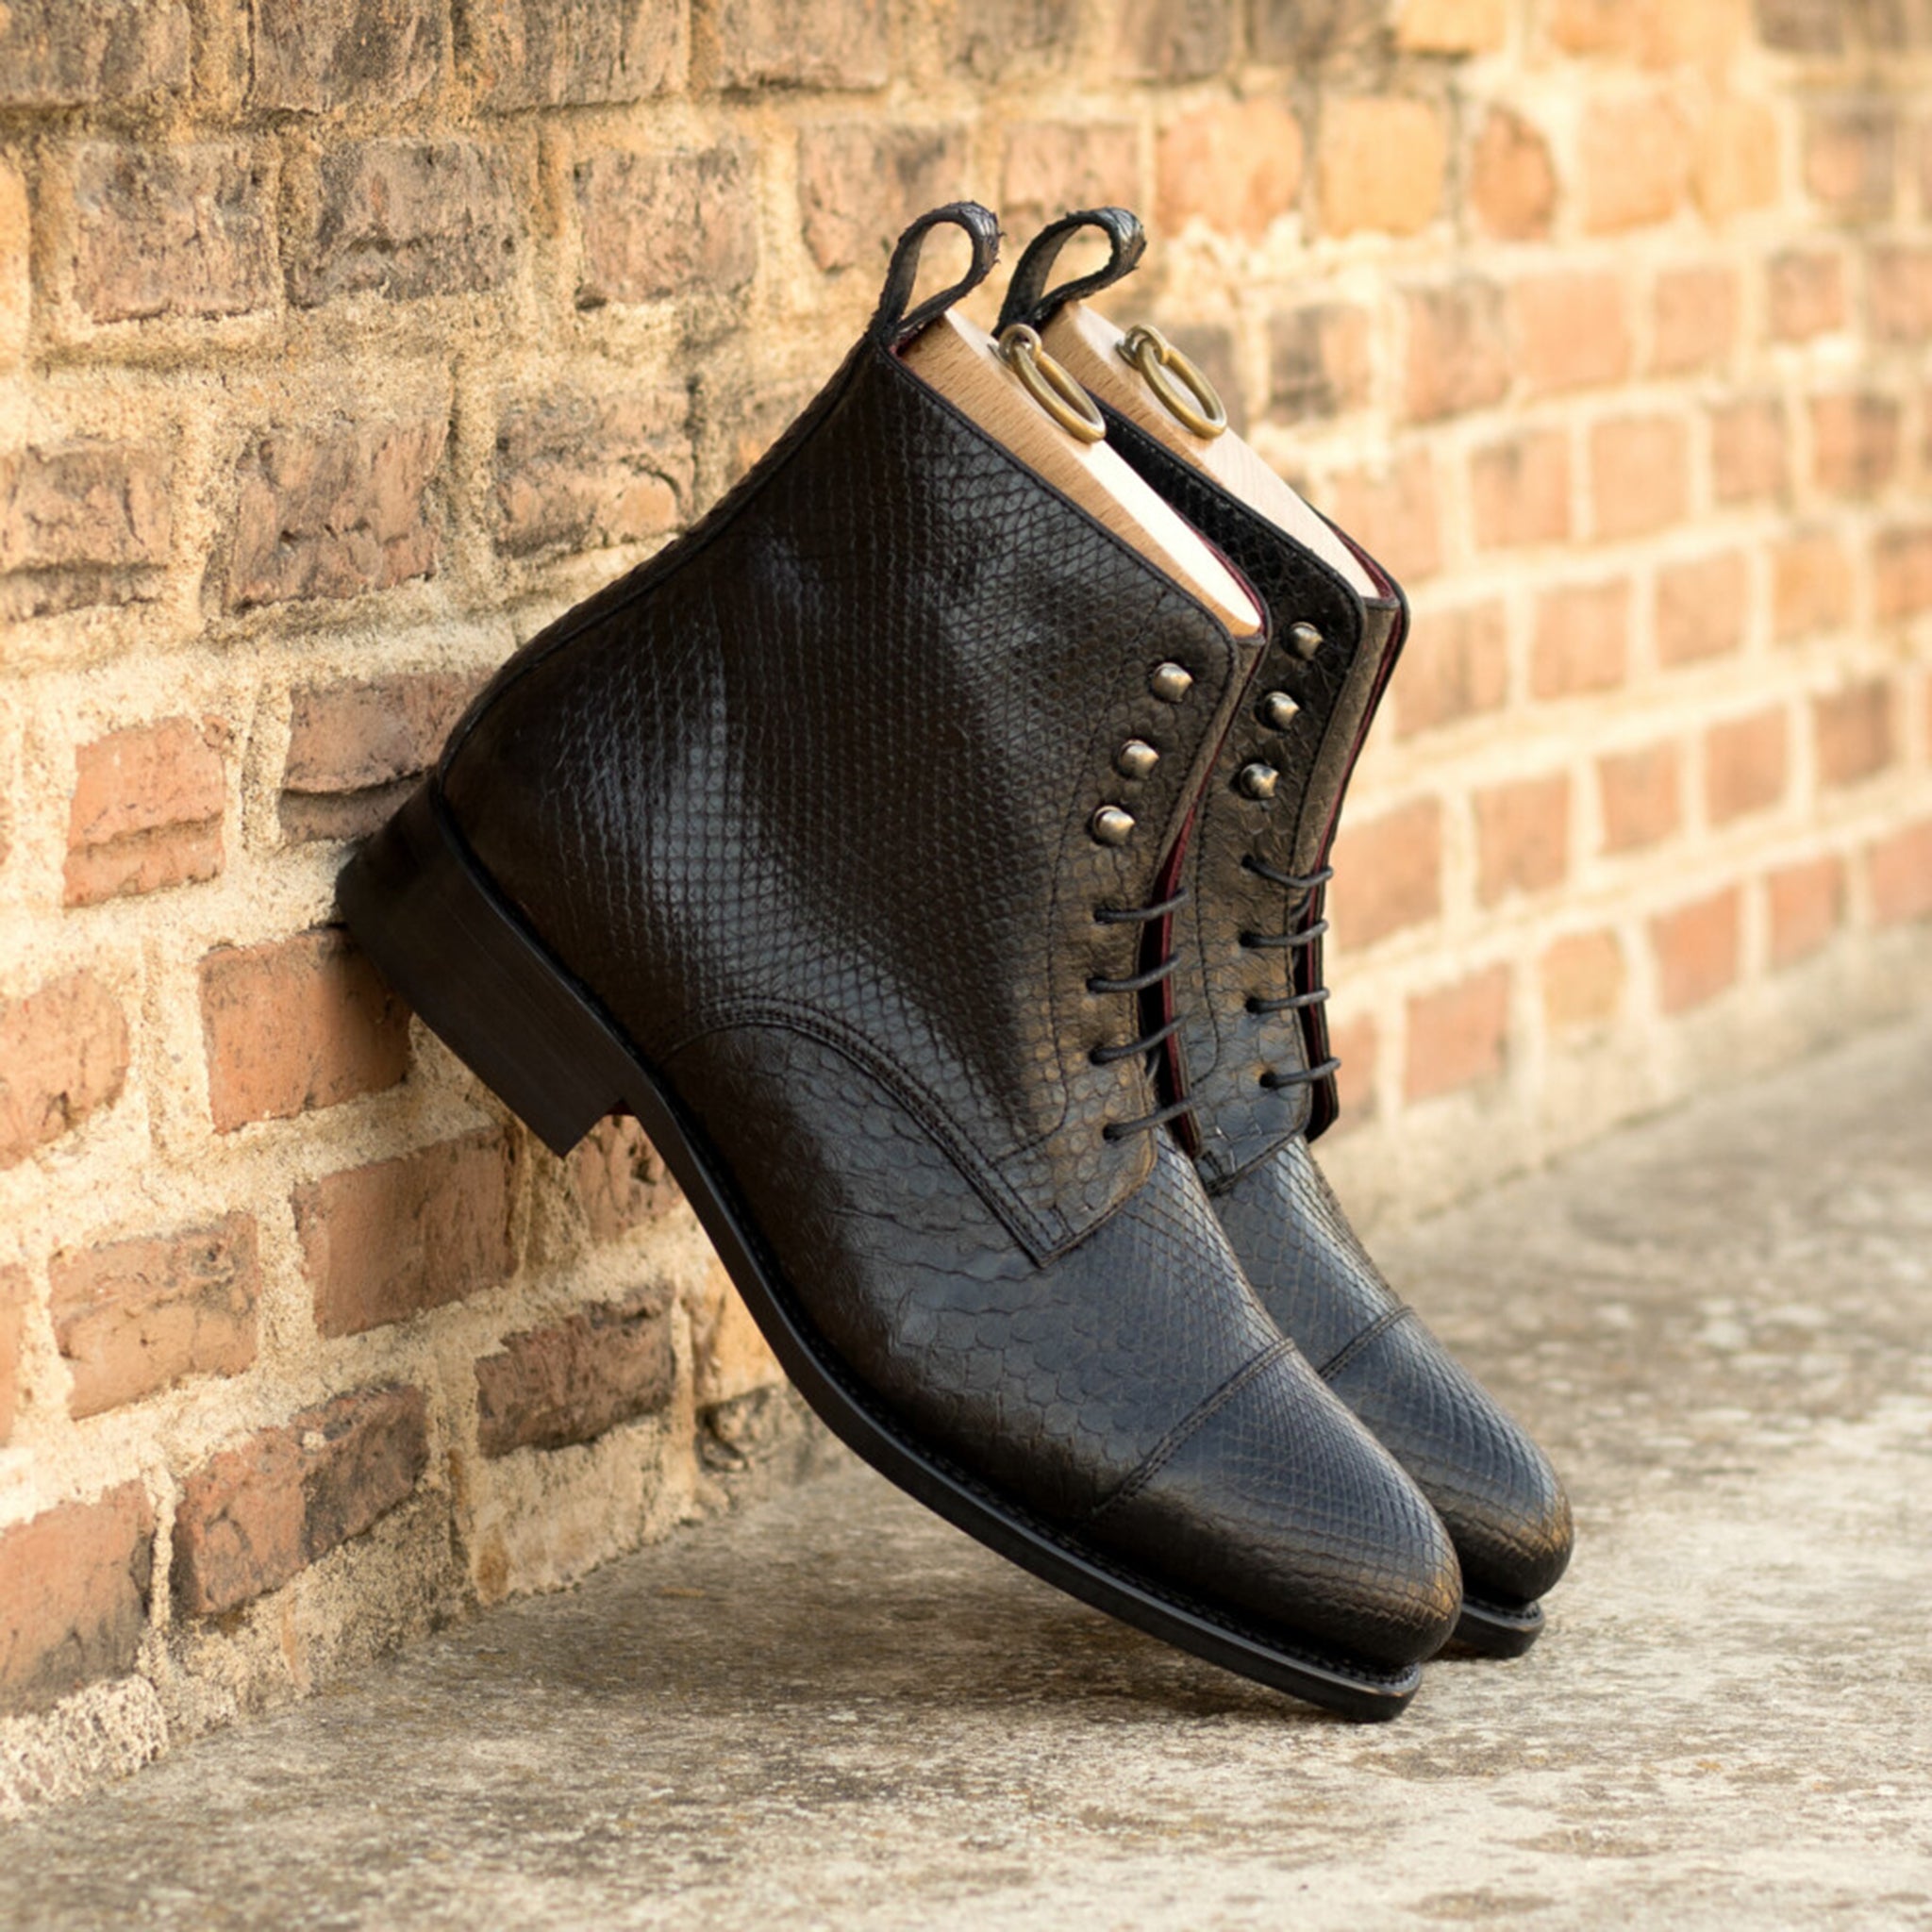 Black Python Leather Derby Boots